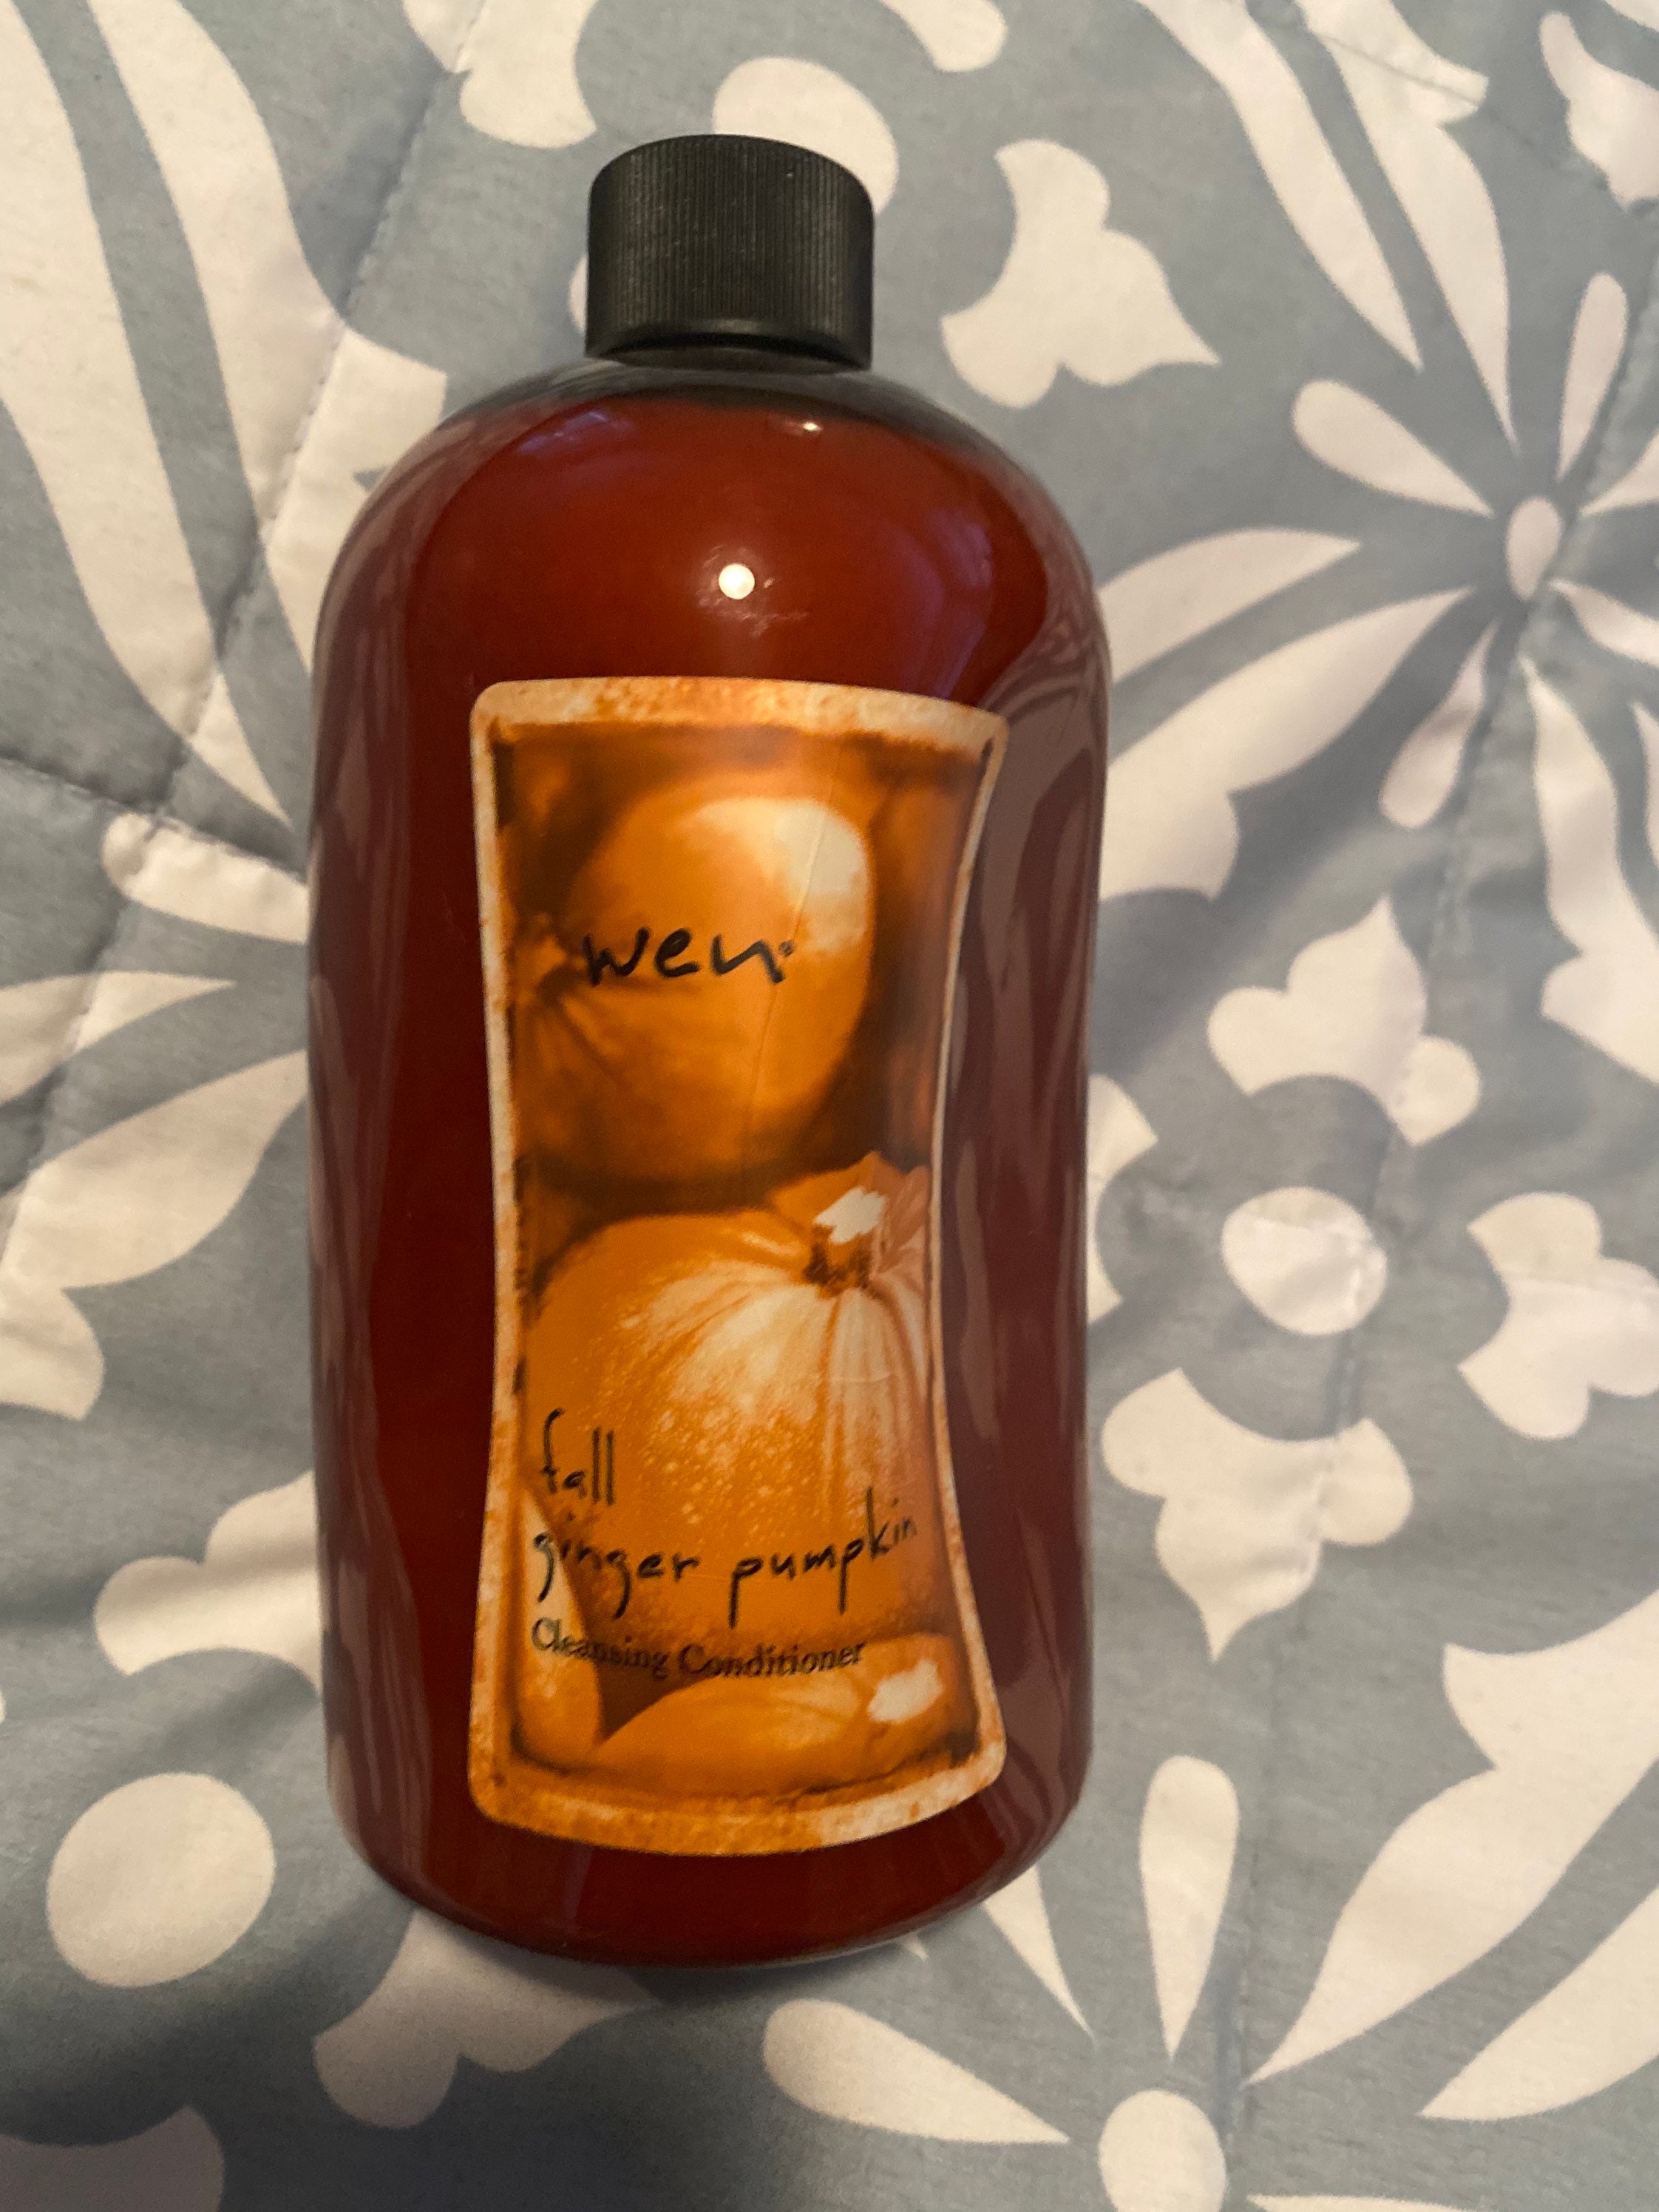 WEN Cleansing Conditioner Fall Ginger Pumpkin Shampoo 16 oz | Etsy